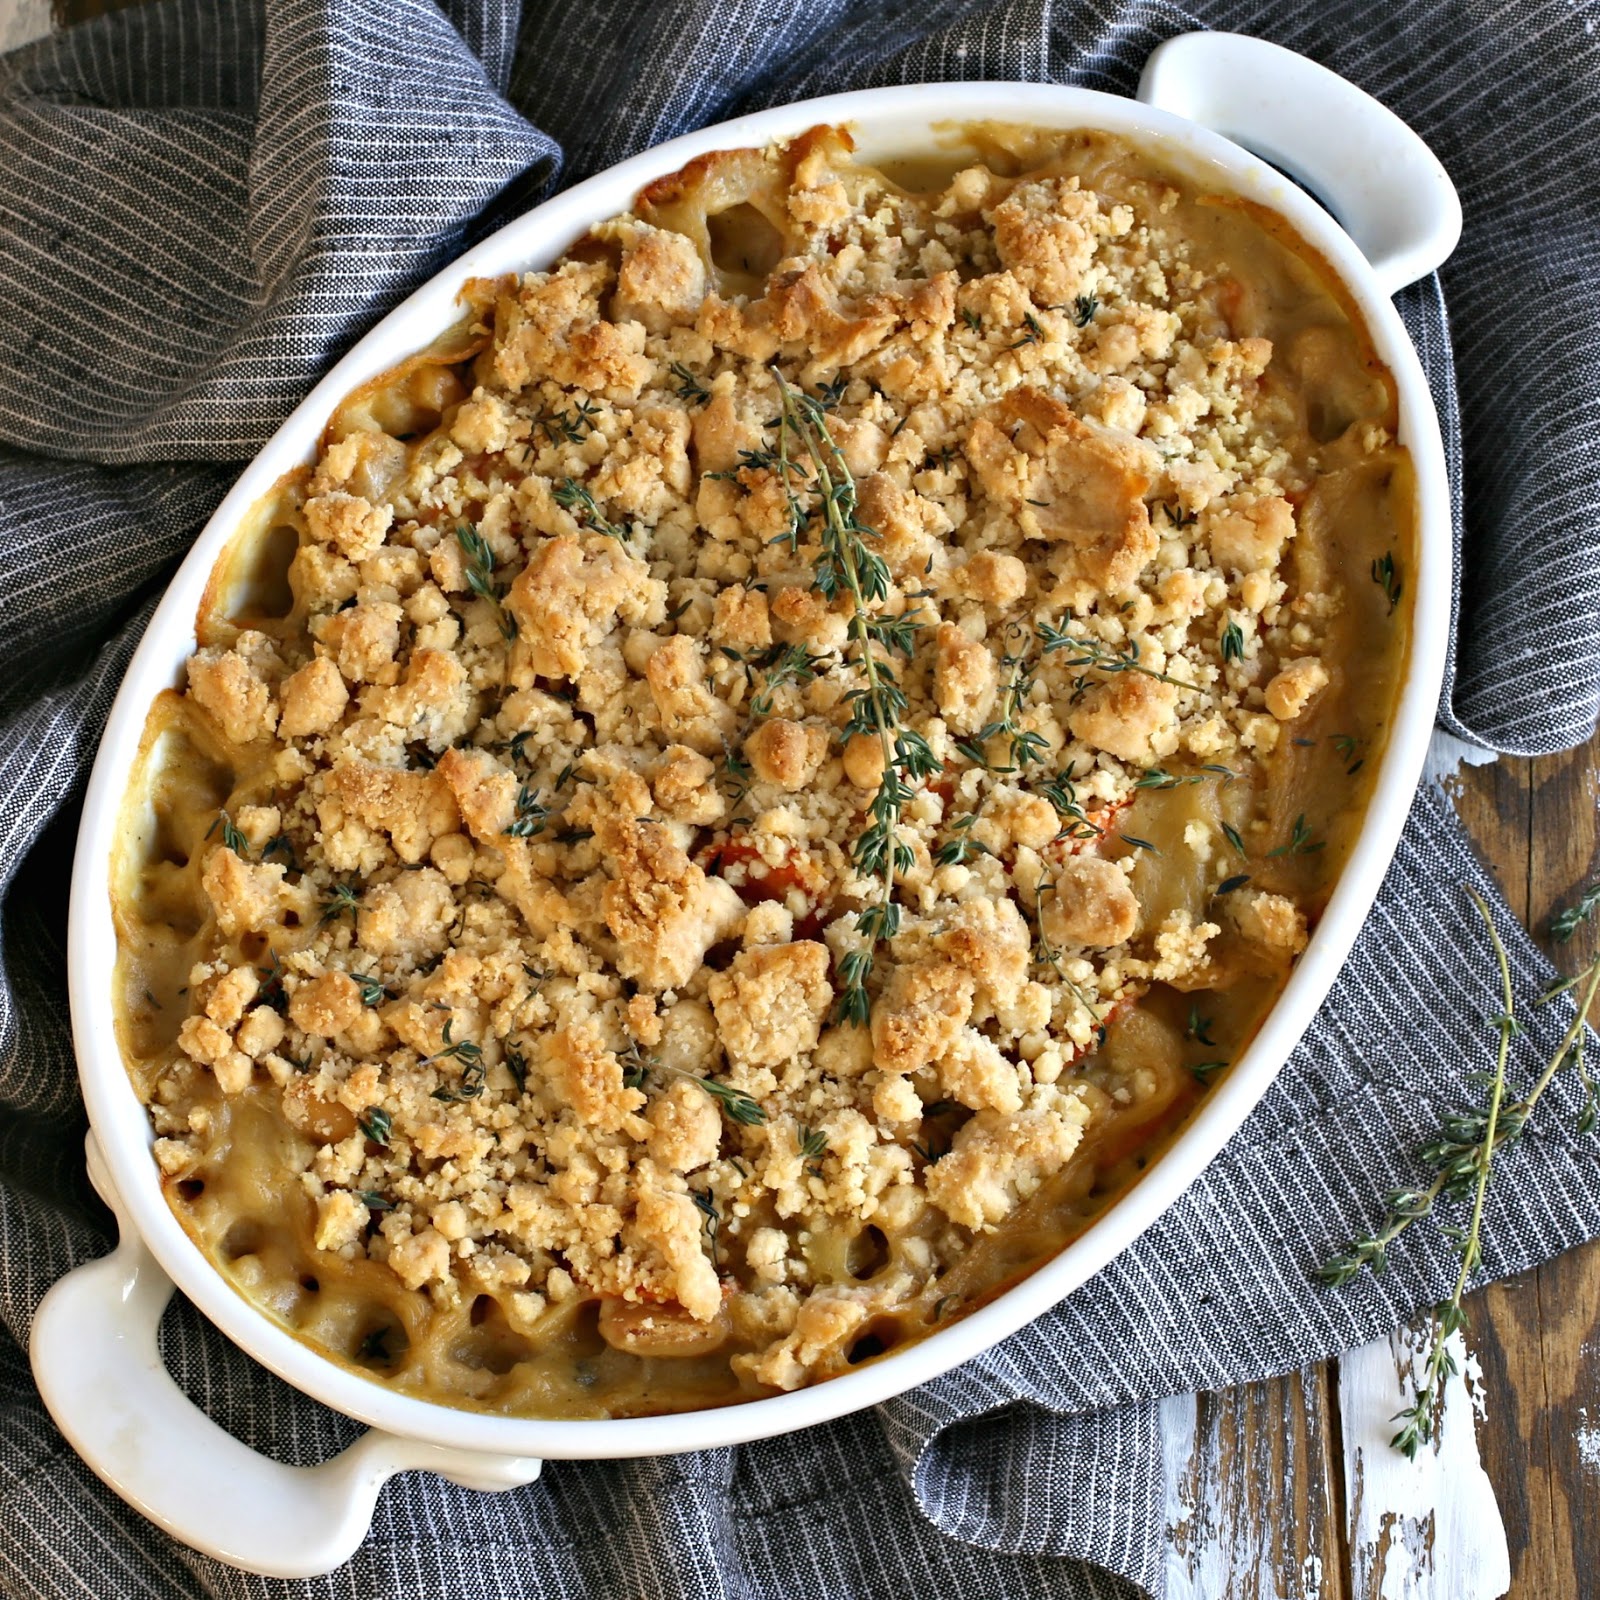 Vegetarian white bean casserole with a savory crumb topping.